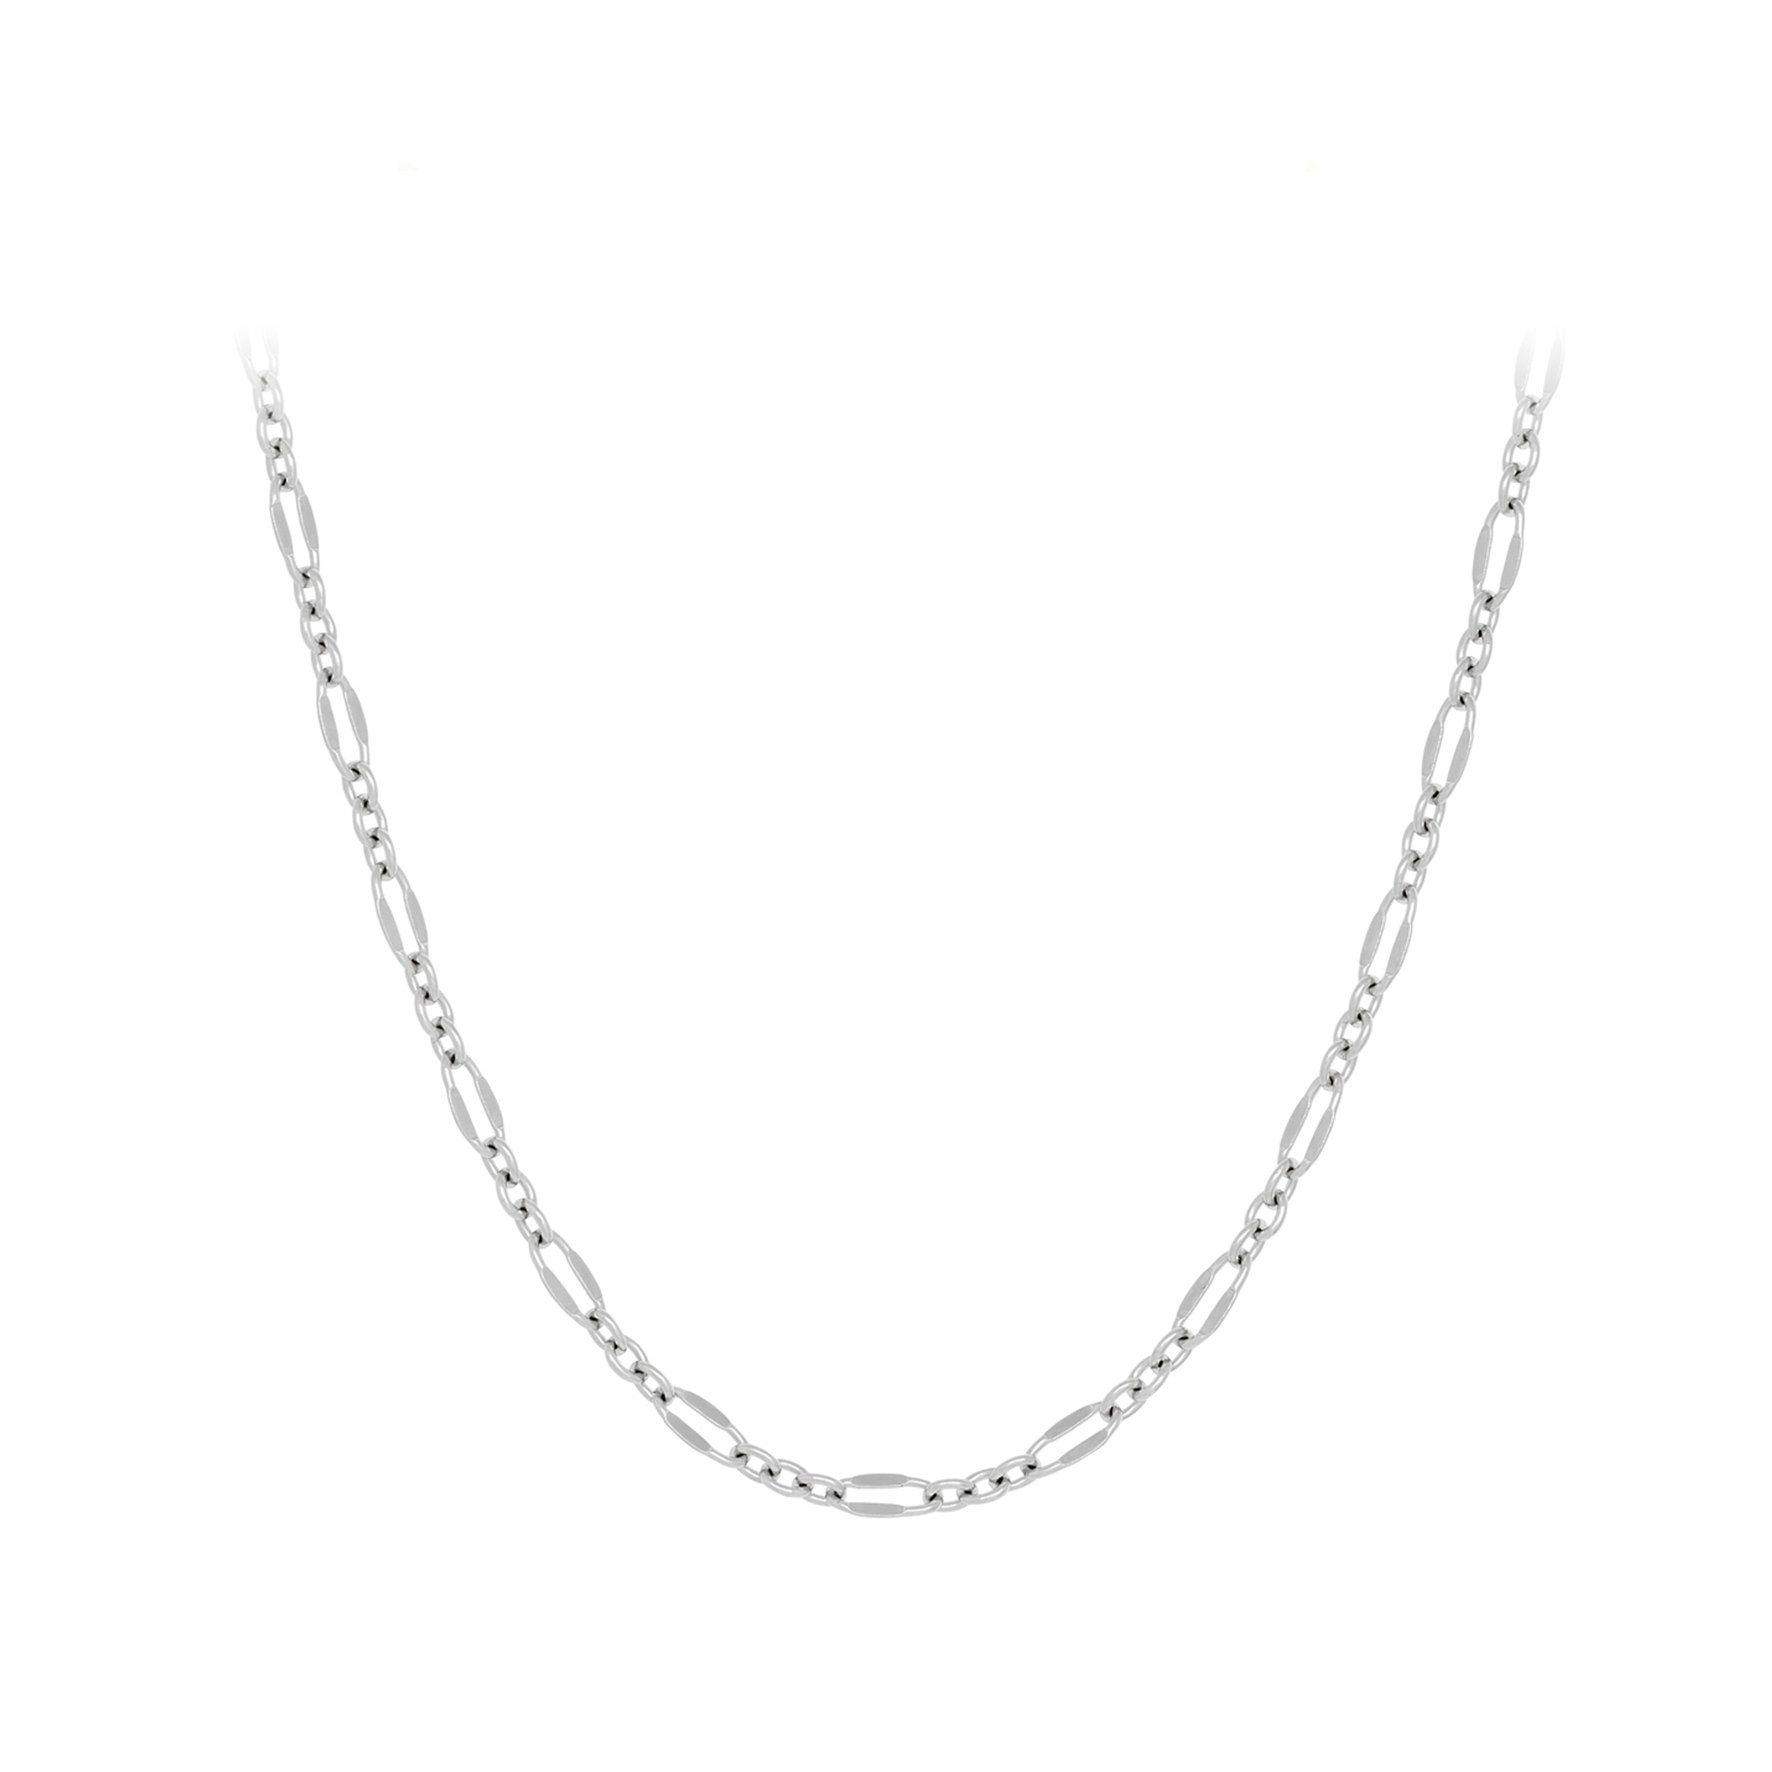 Eden Necklace from Pernille Corydon in Silver Sterling 925